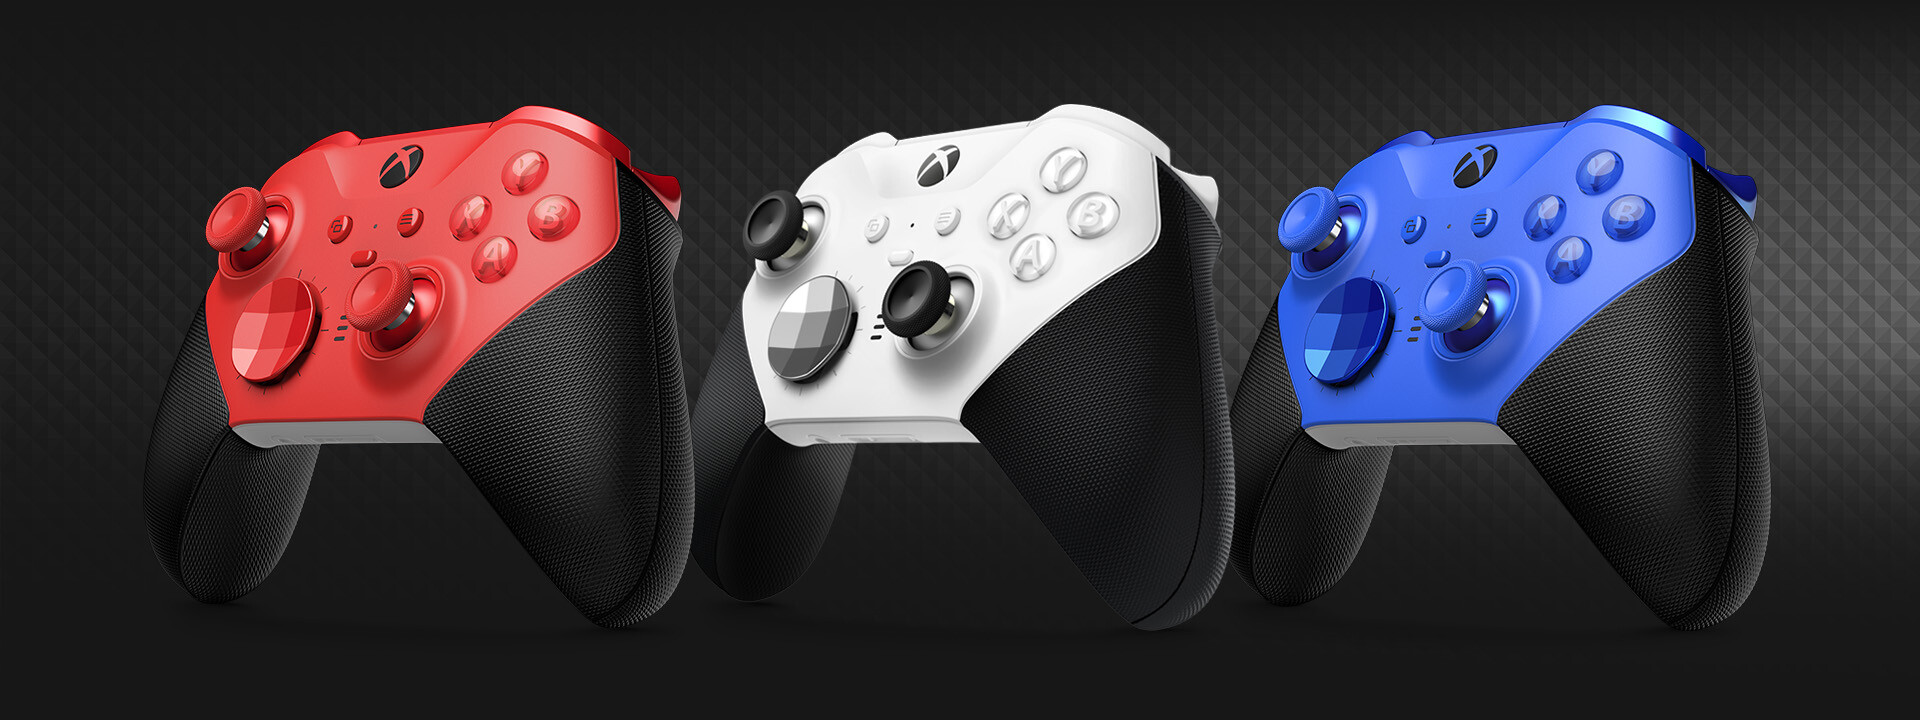 Blue in Series | Vibrant Red or Wireless Xbox 2 Now Core TechPowerUp Elite Controller Available